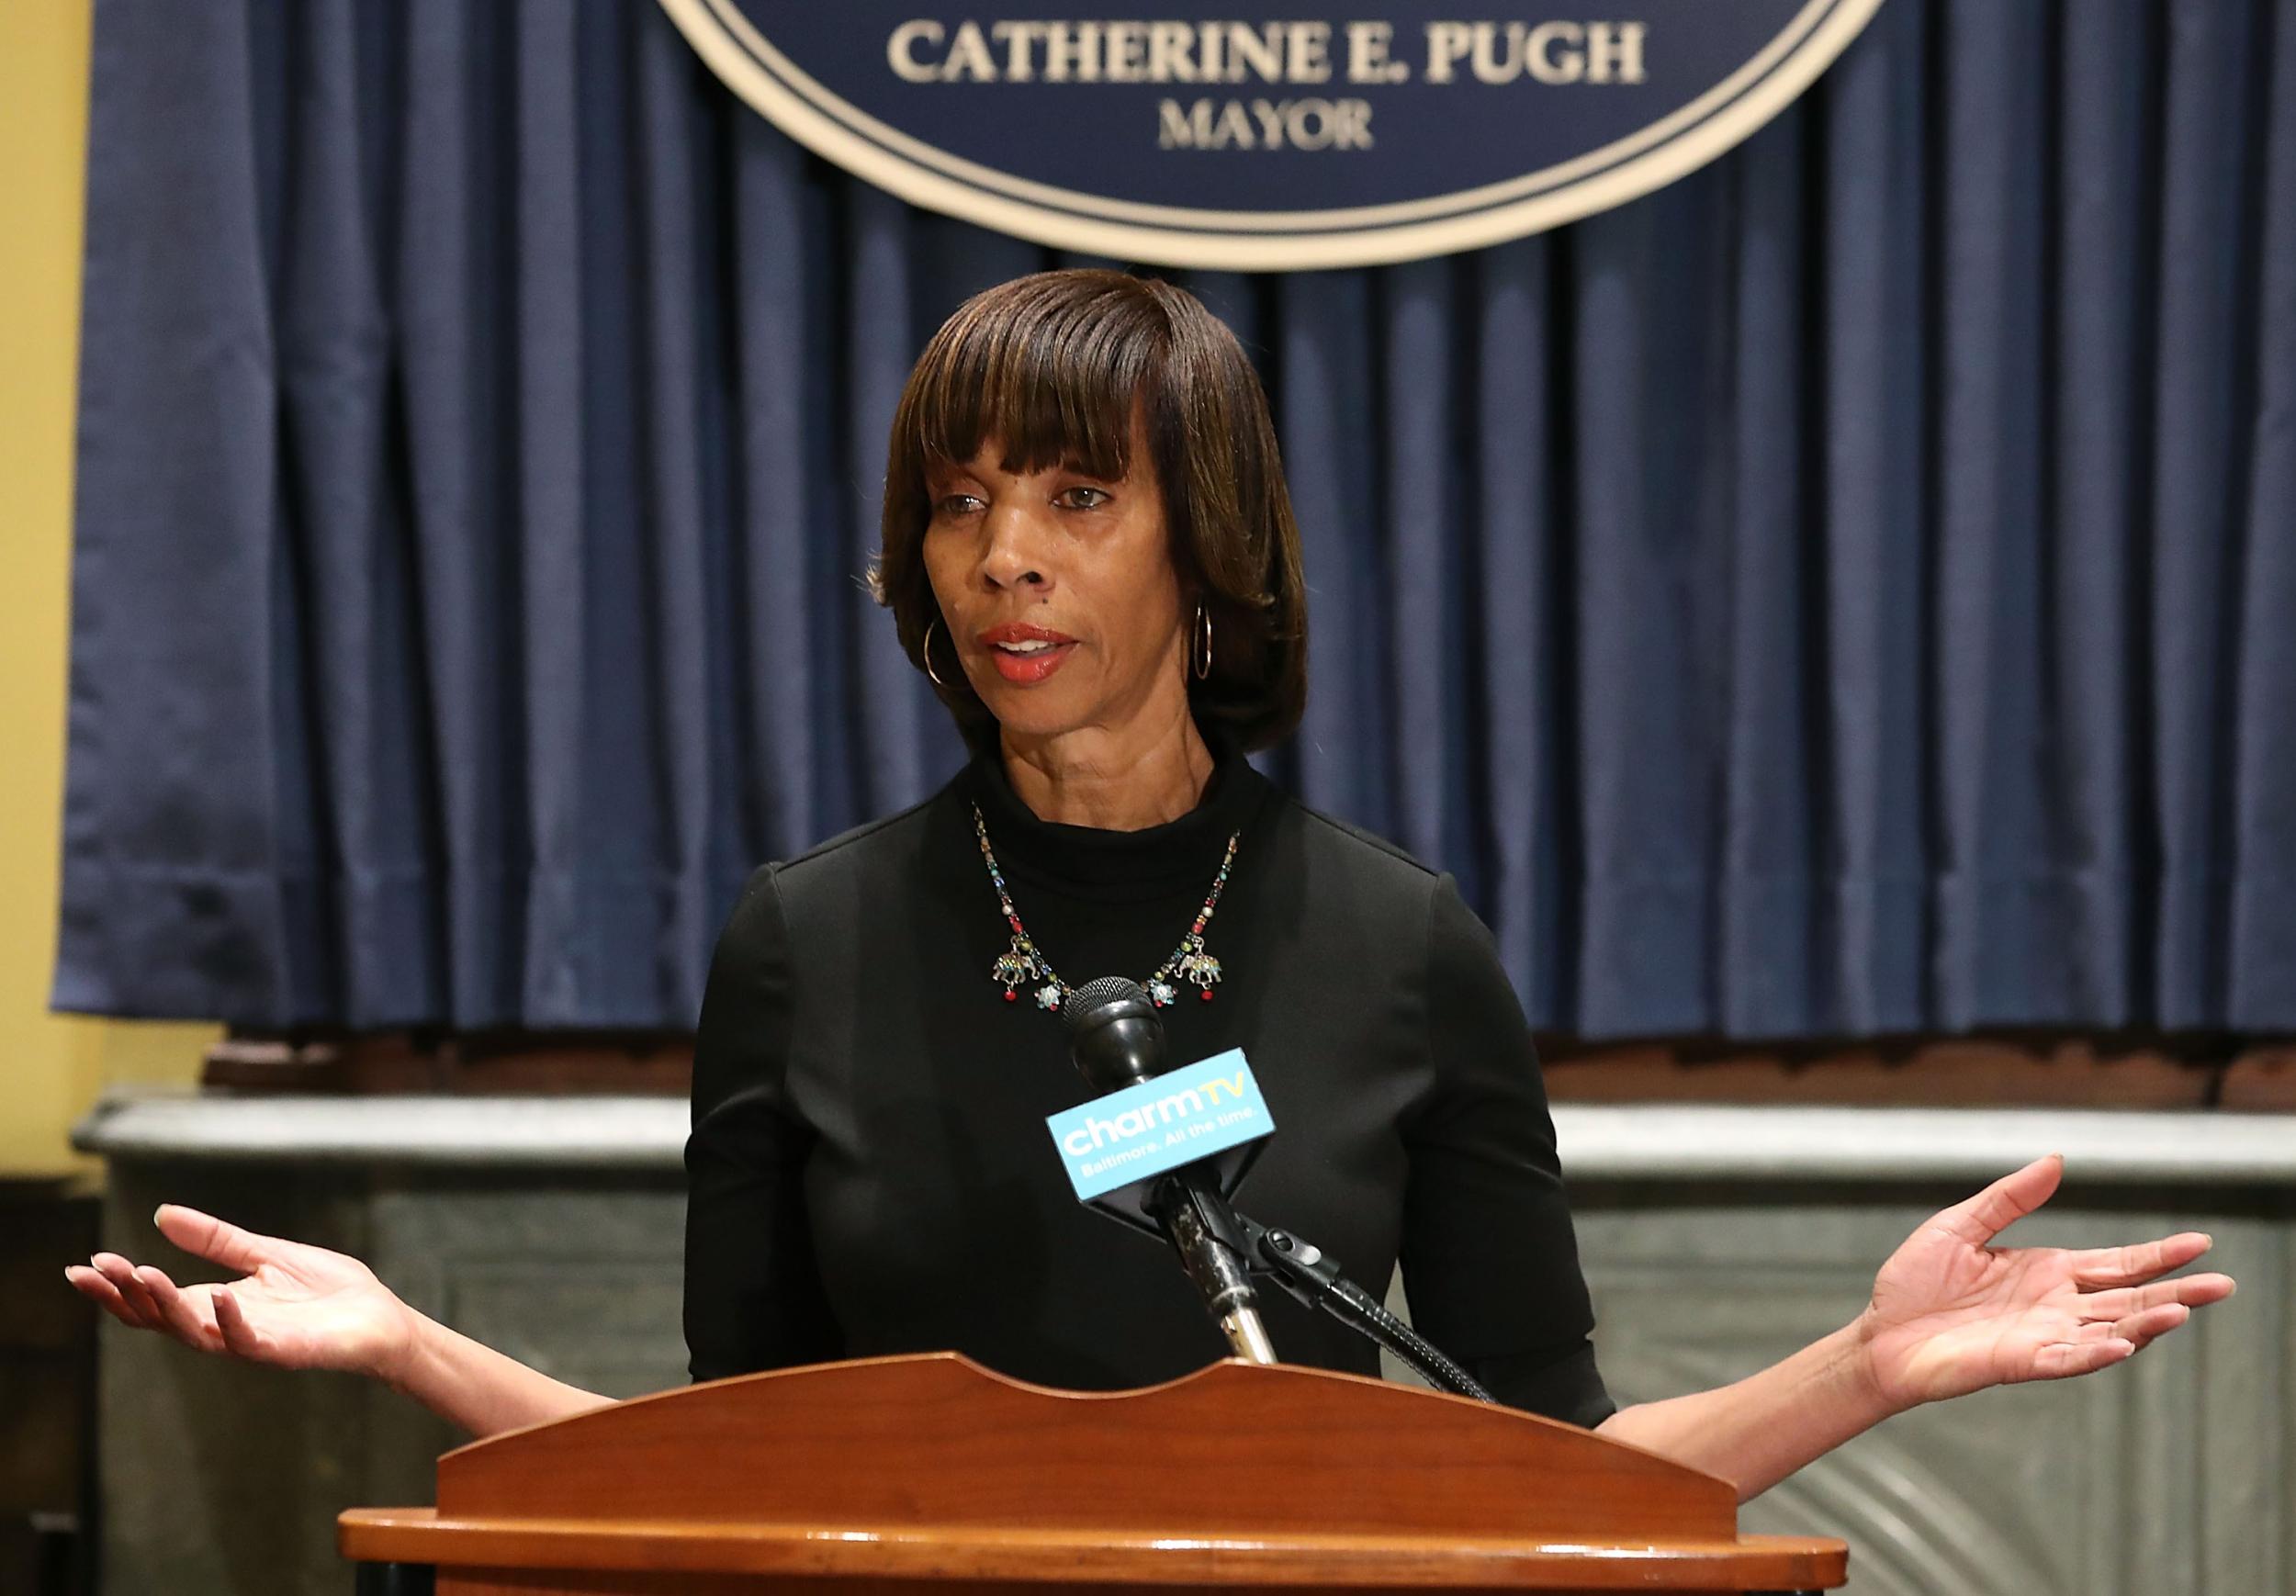 The mayor of Baltimore has resigned exactly one week after federal agents raided her office and home amid a scandal involving her self-published children's books.